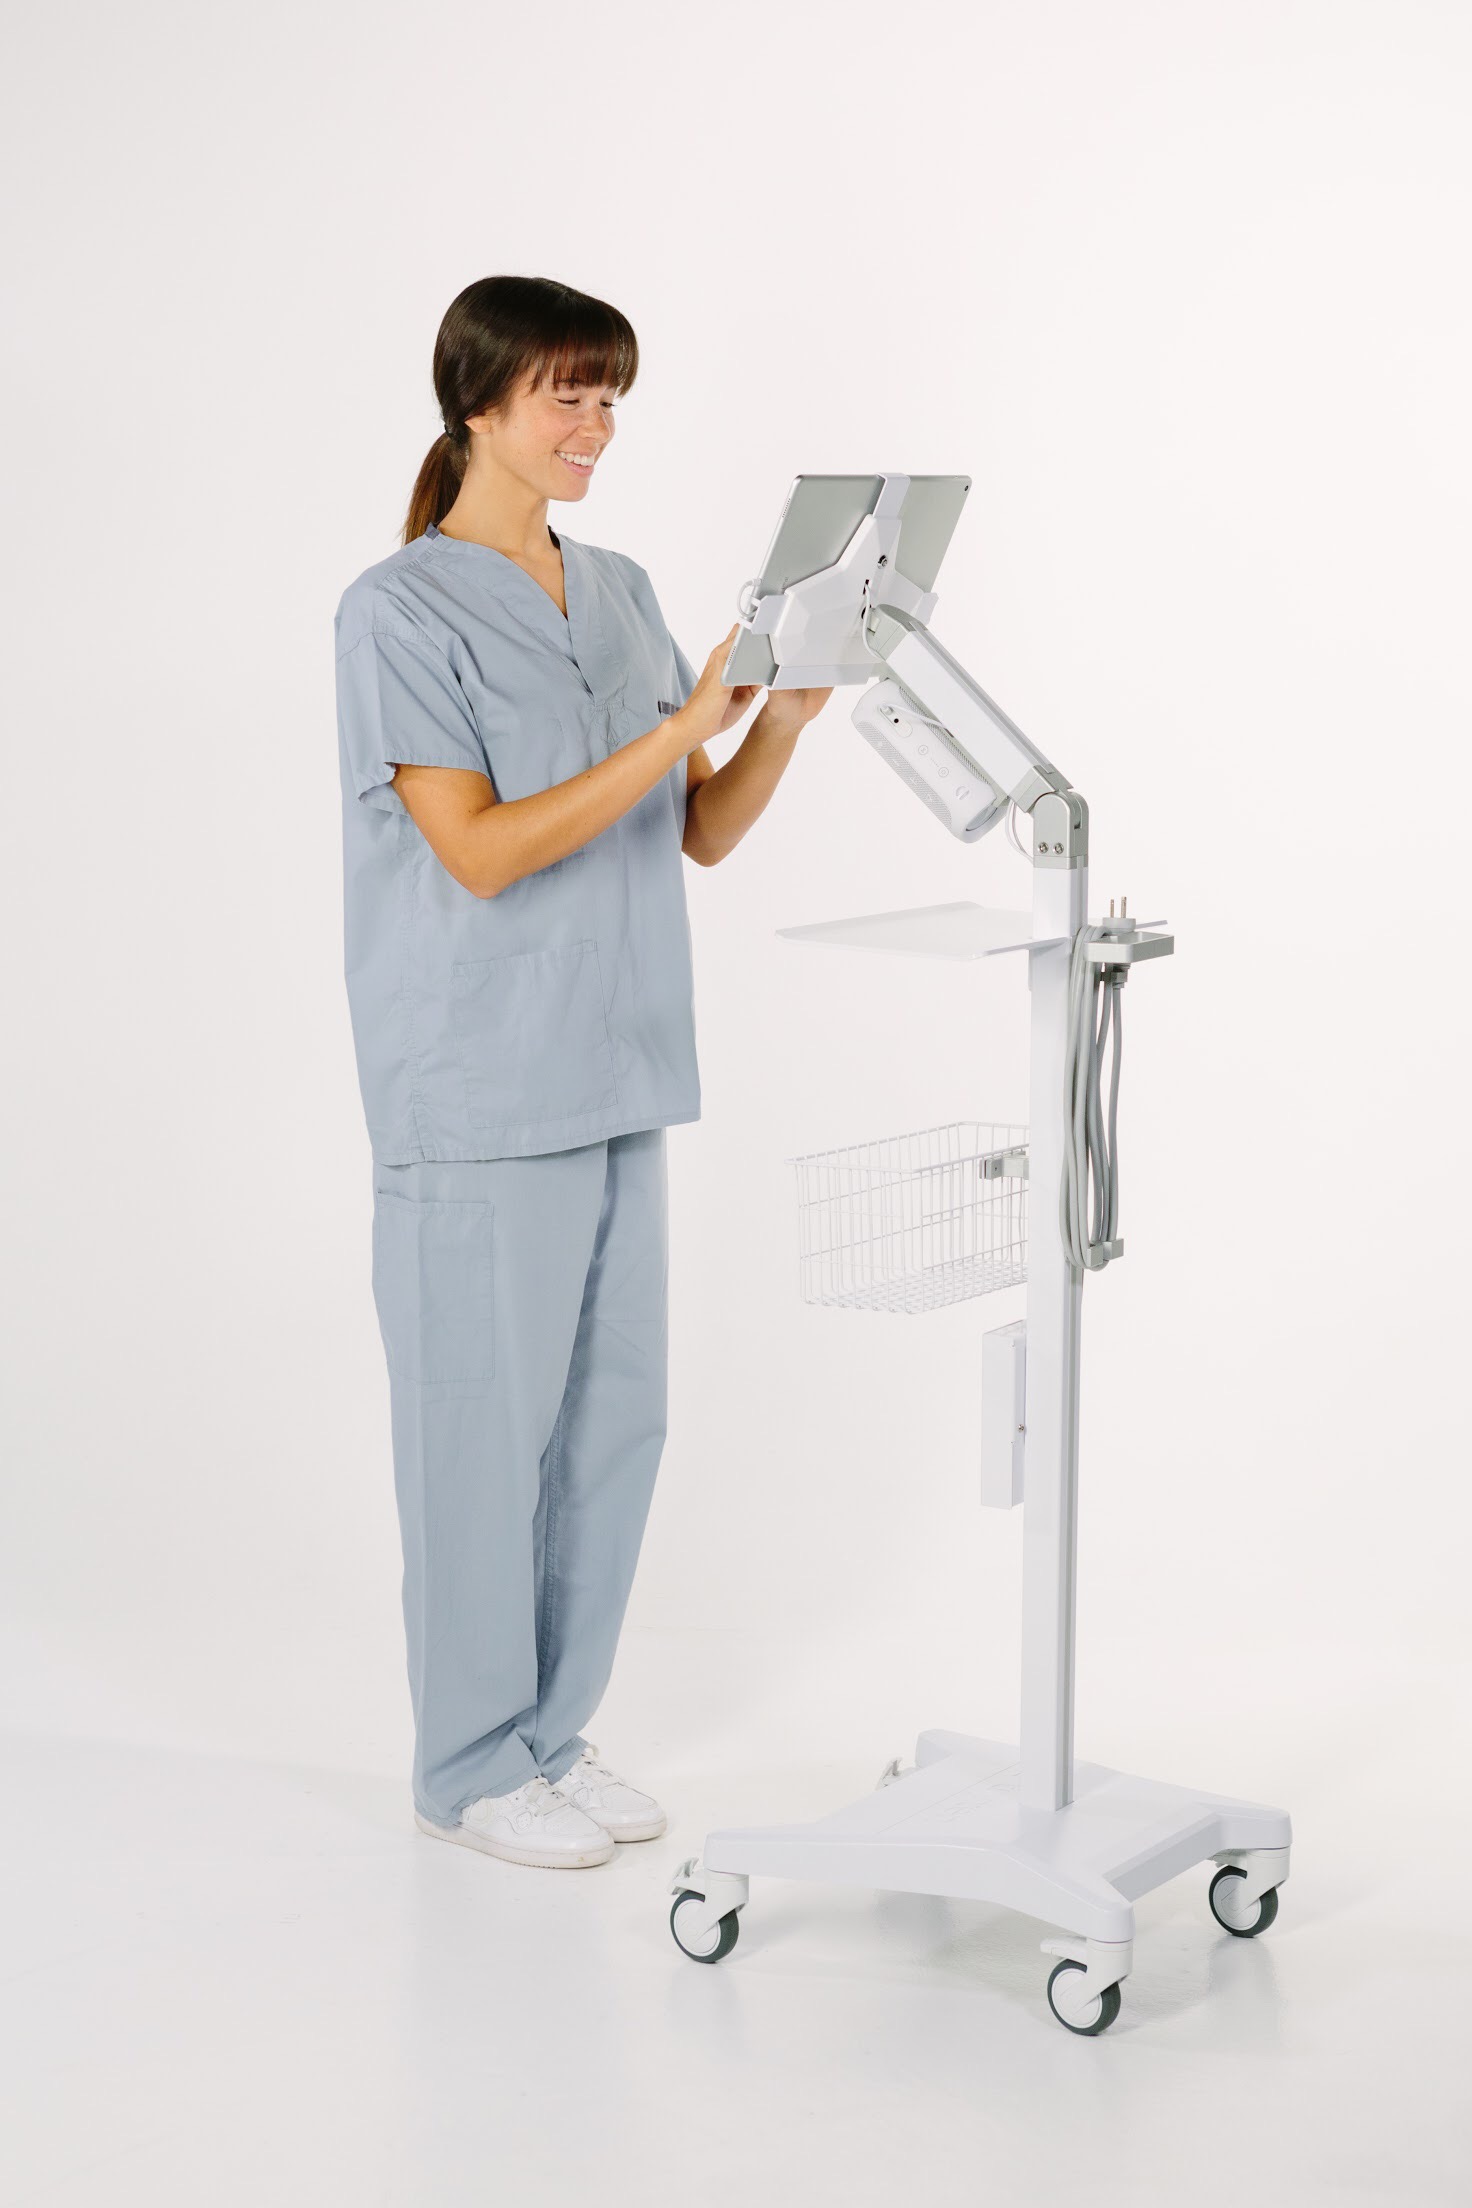 Best telehealth carts from Tryten and Boostlingo.